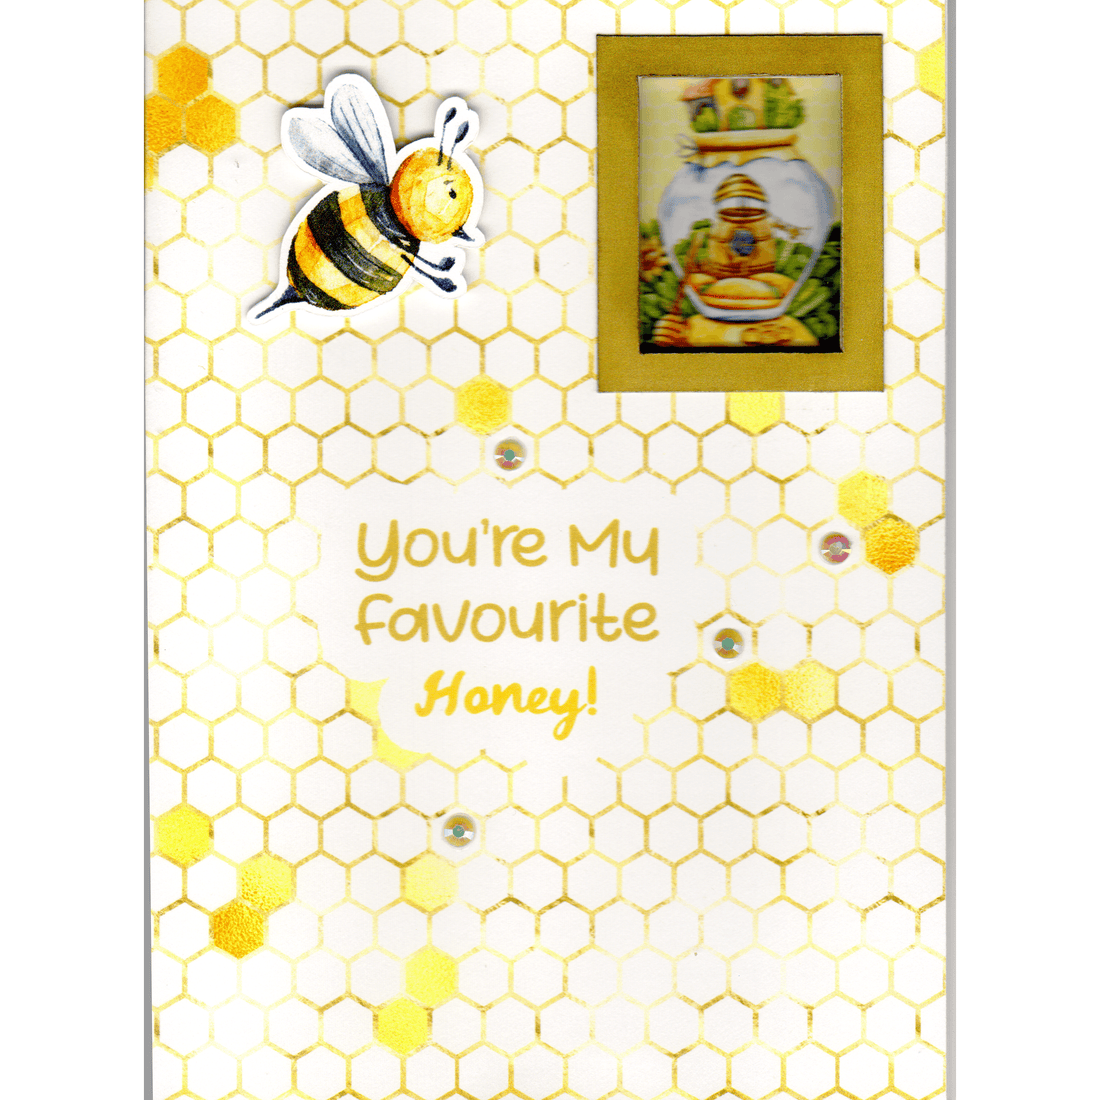 embellished front of card showing bee raised up from surface - and window with stylised honeybee home